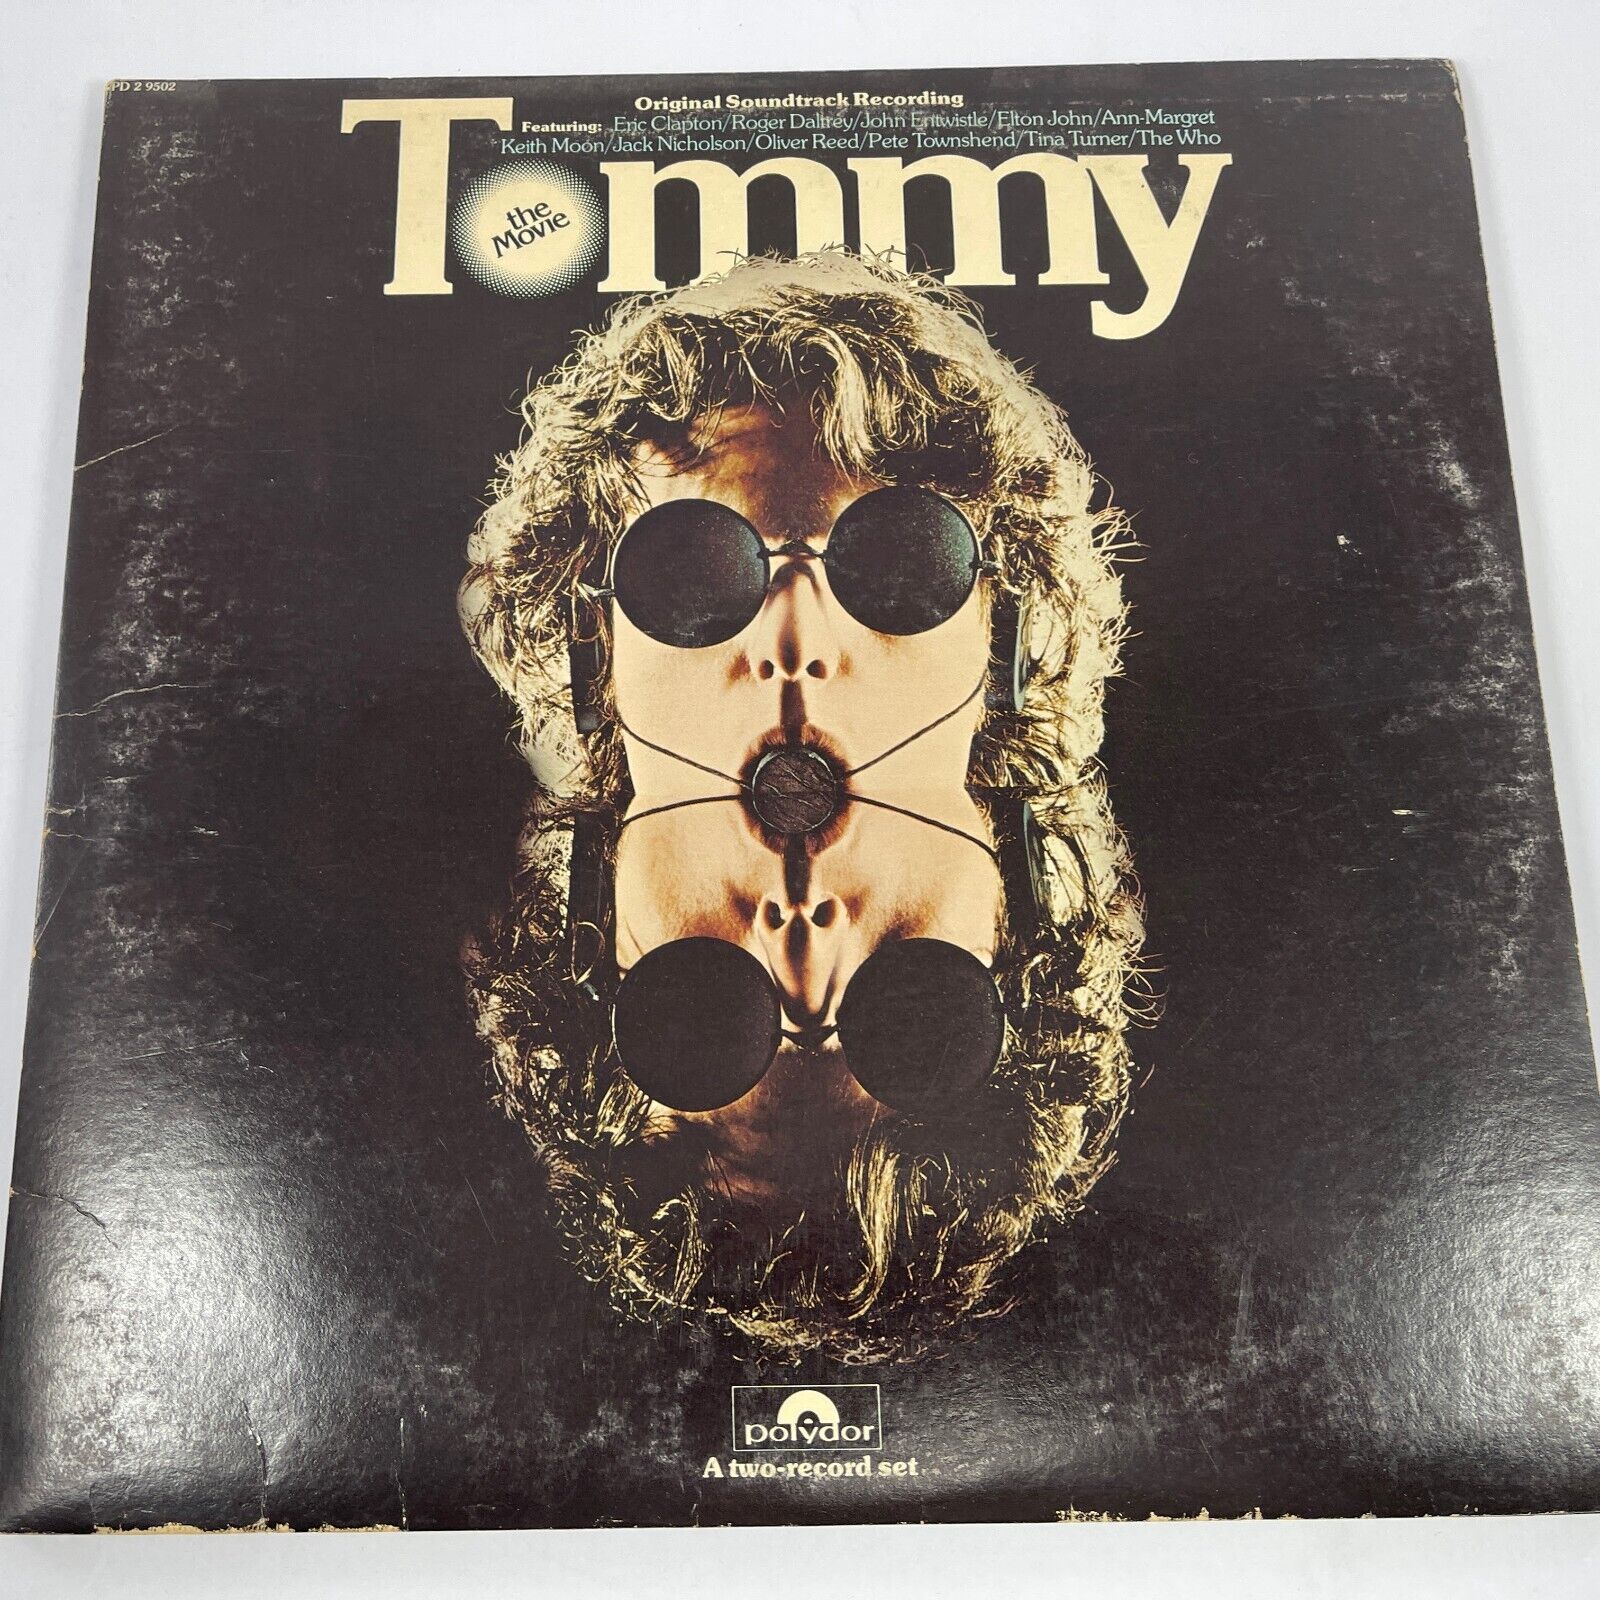 TOMMY THE MOVIE SOUNDTRACK LP VARIOUS ARTISTS - ELTON JOHN - THE WHO 